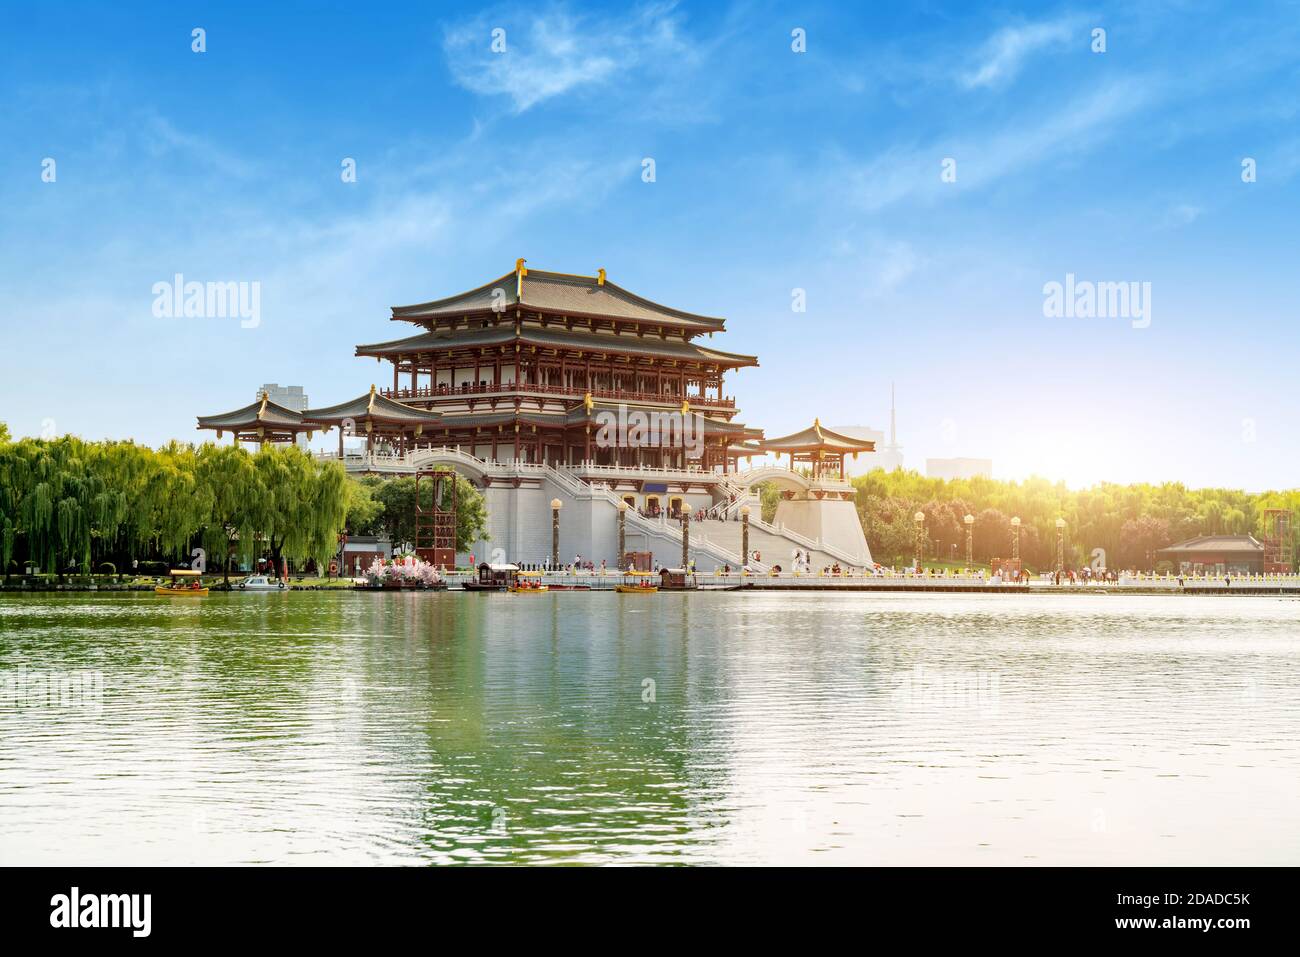 The Ziyun Tower was built in 727 AD and is the main building of the Datang Furong Garden, Xi'an, China. Stock Photo